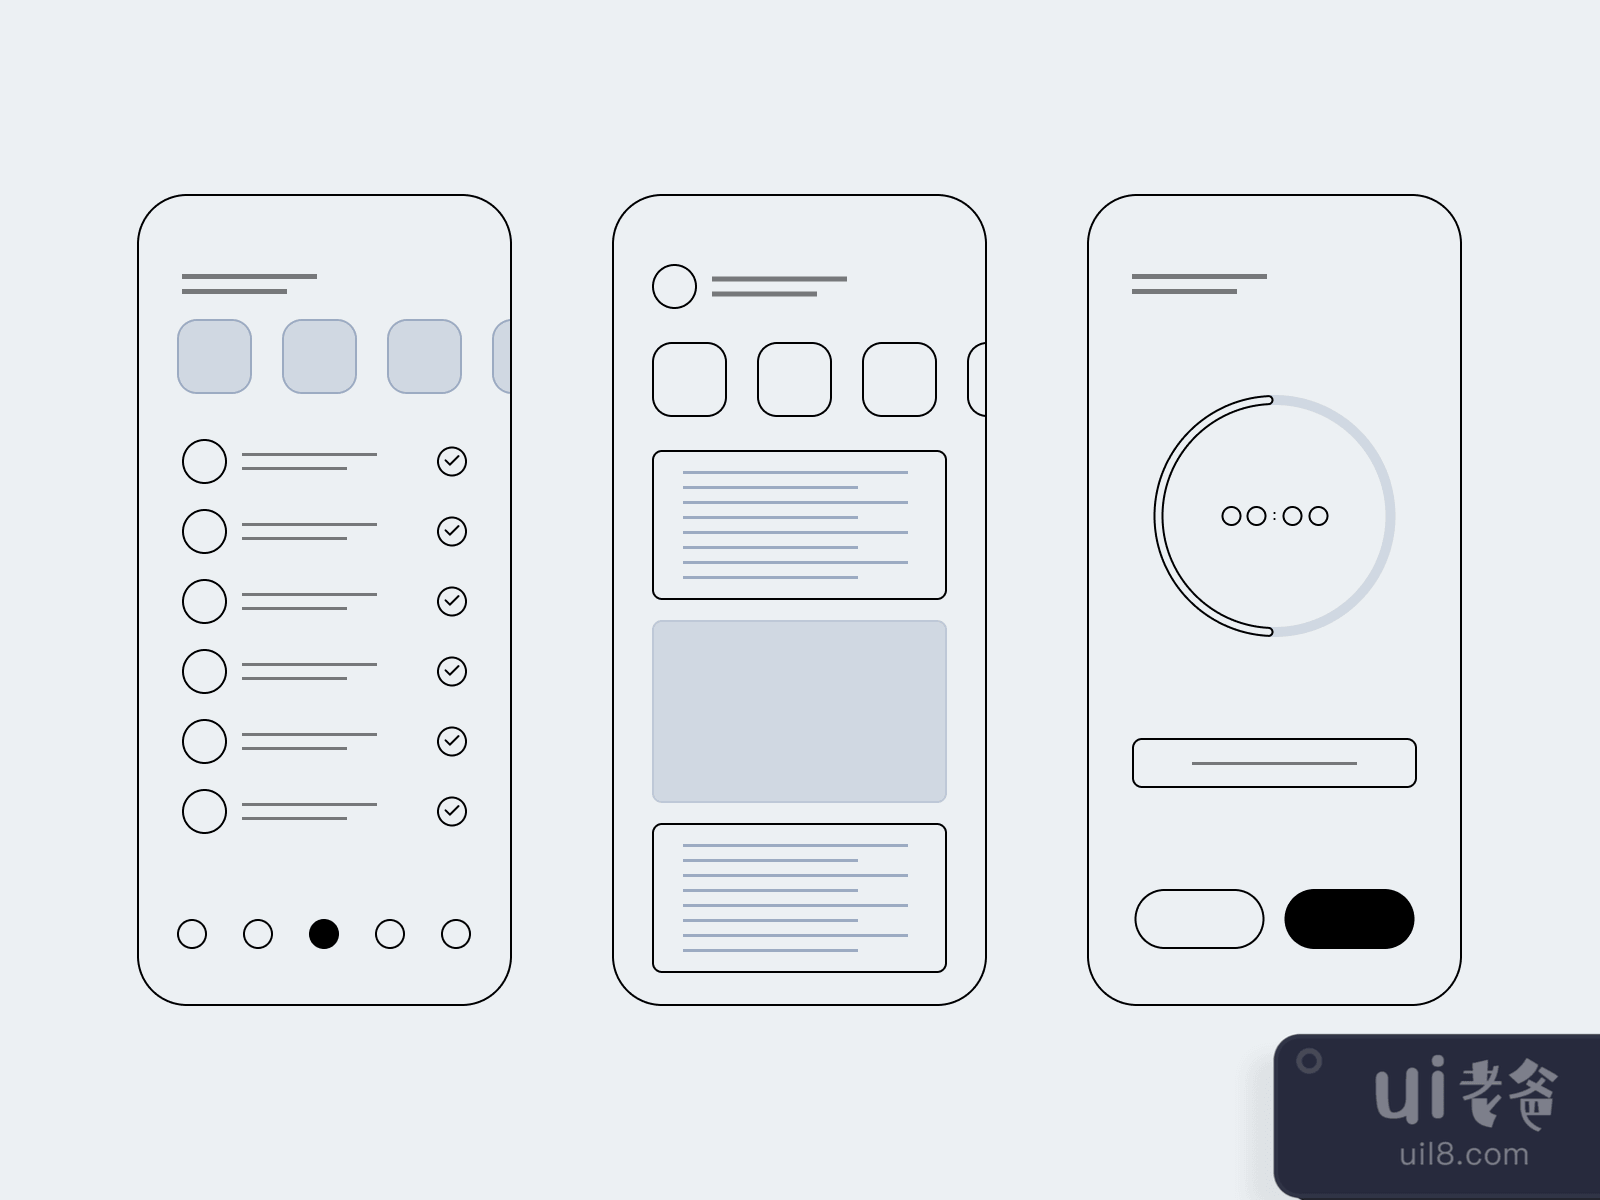 Wireframes for Mobile UI Design for Figma and Adobe XD No 2